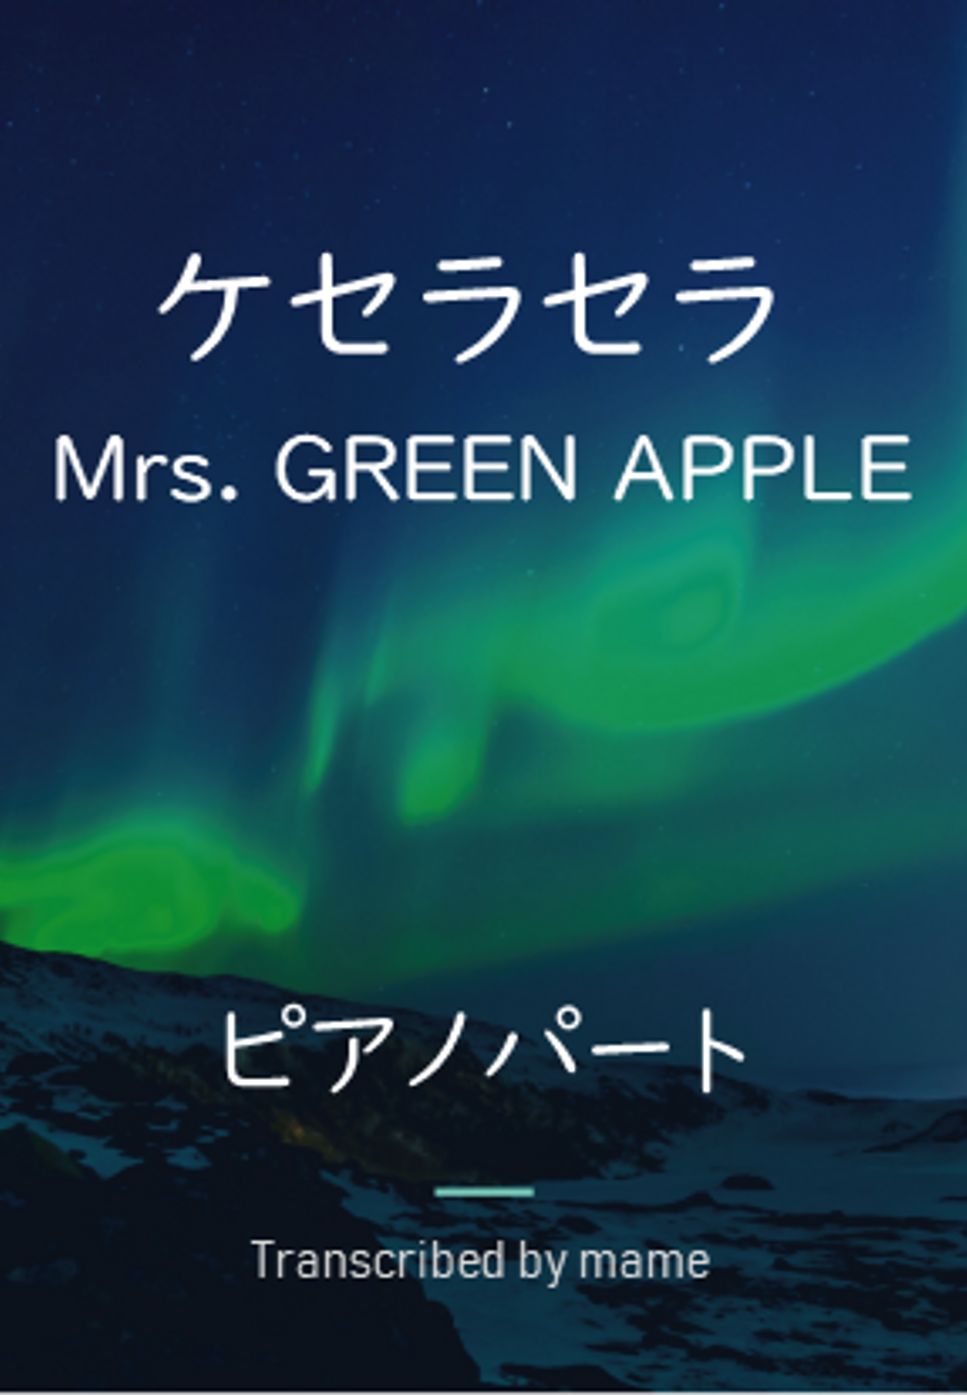 Mrs. GREEN APPLE - ケセラセラ (keyboard part) by mame